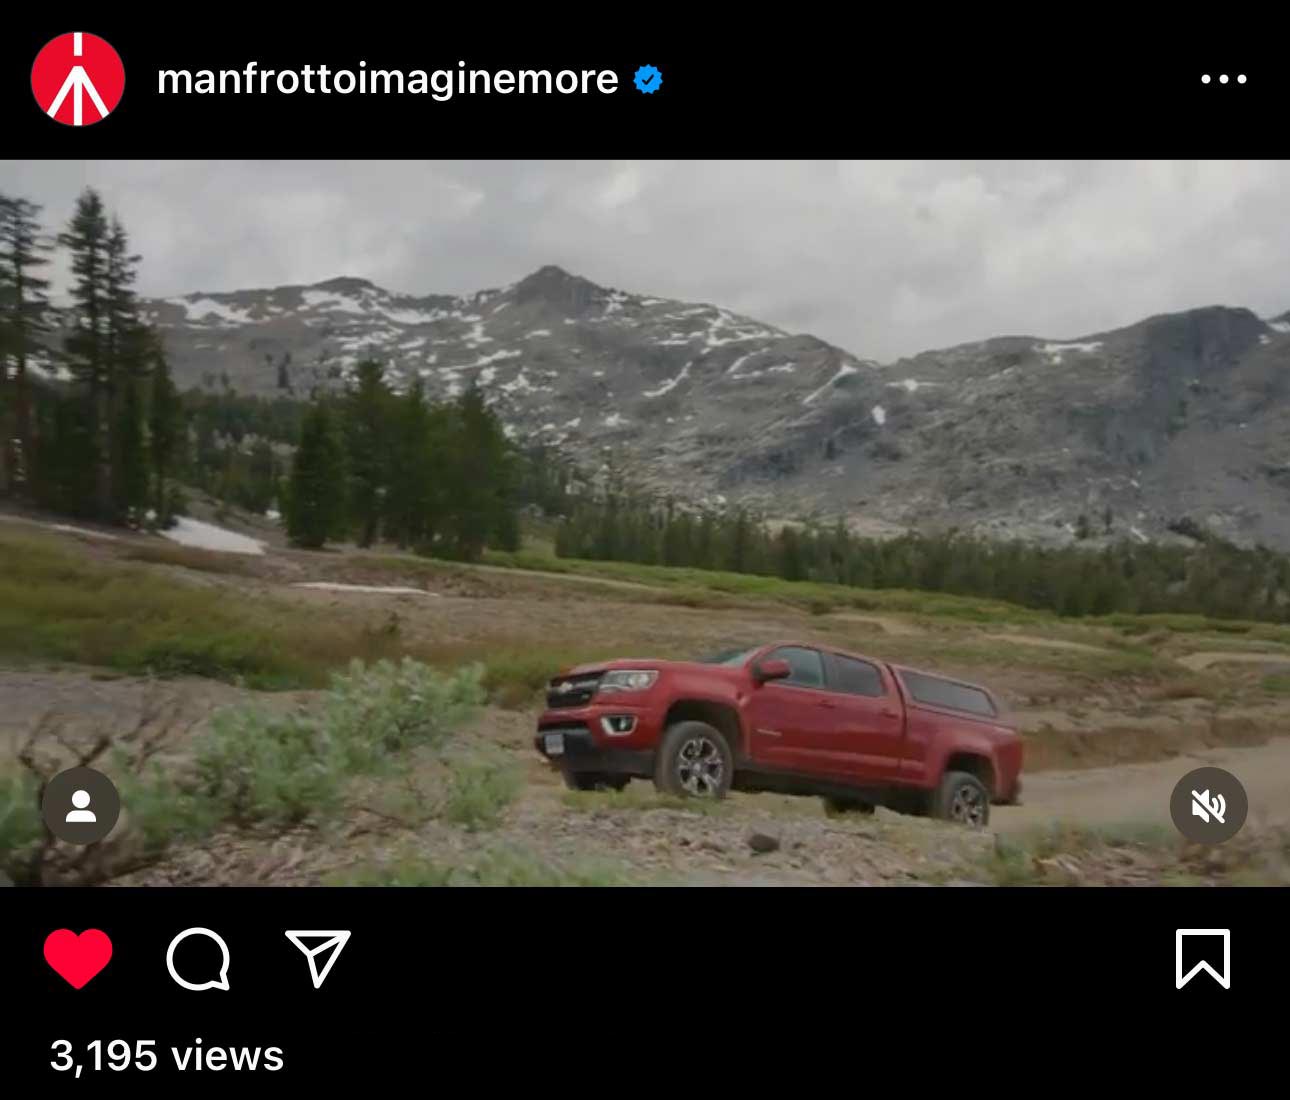 Driving past snowy mountains in a post shared by Manfrotto.